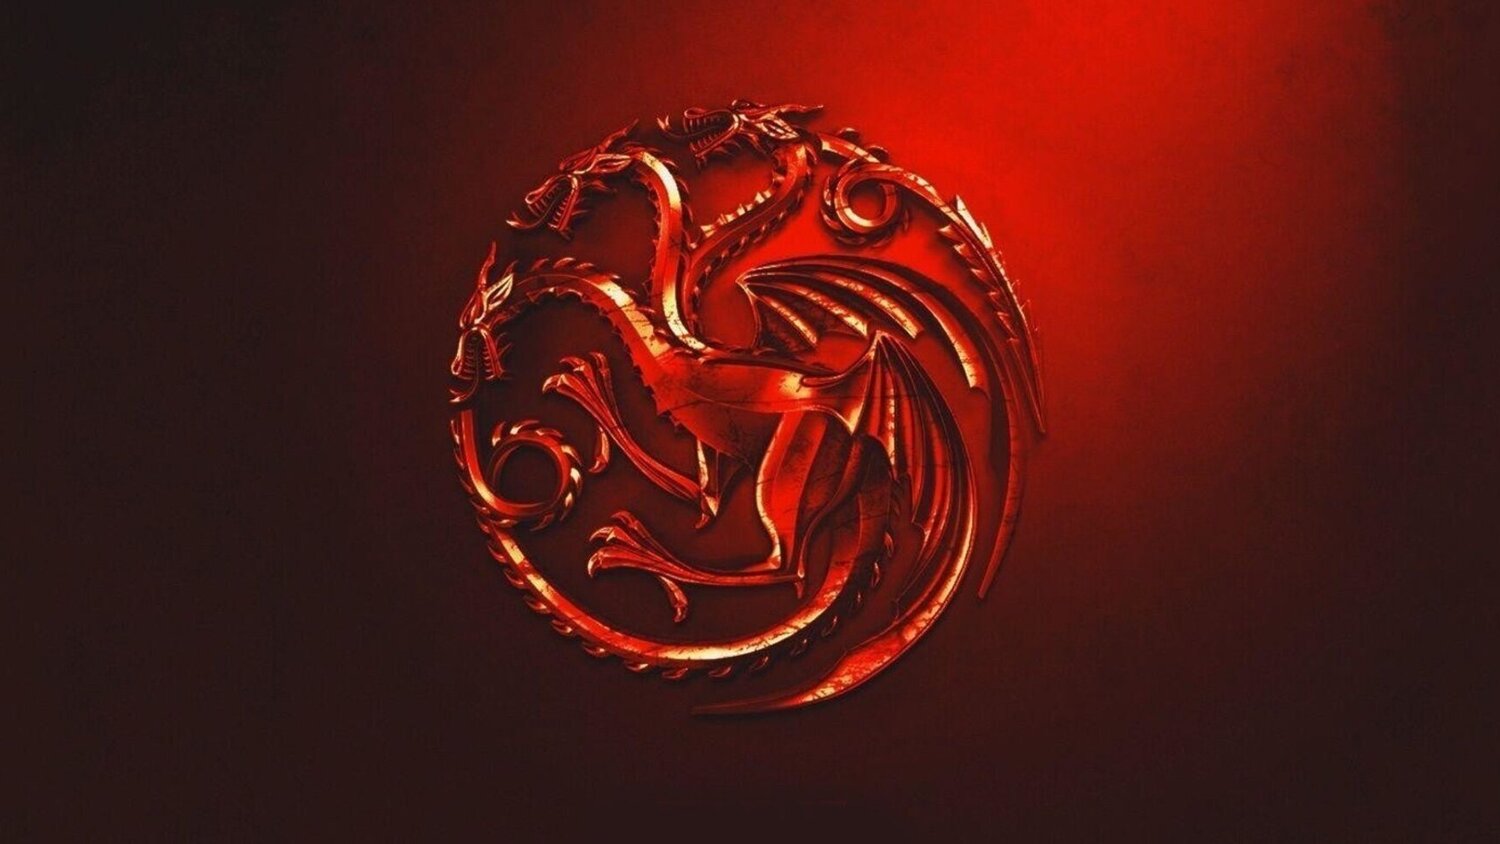 hbo-s-house-of-the-dragon-starts-production-and-there-are-photos-from-the-table-read-geektyrant